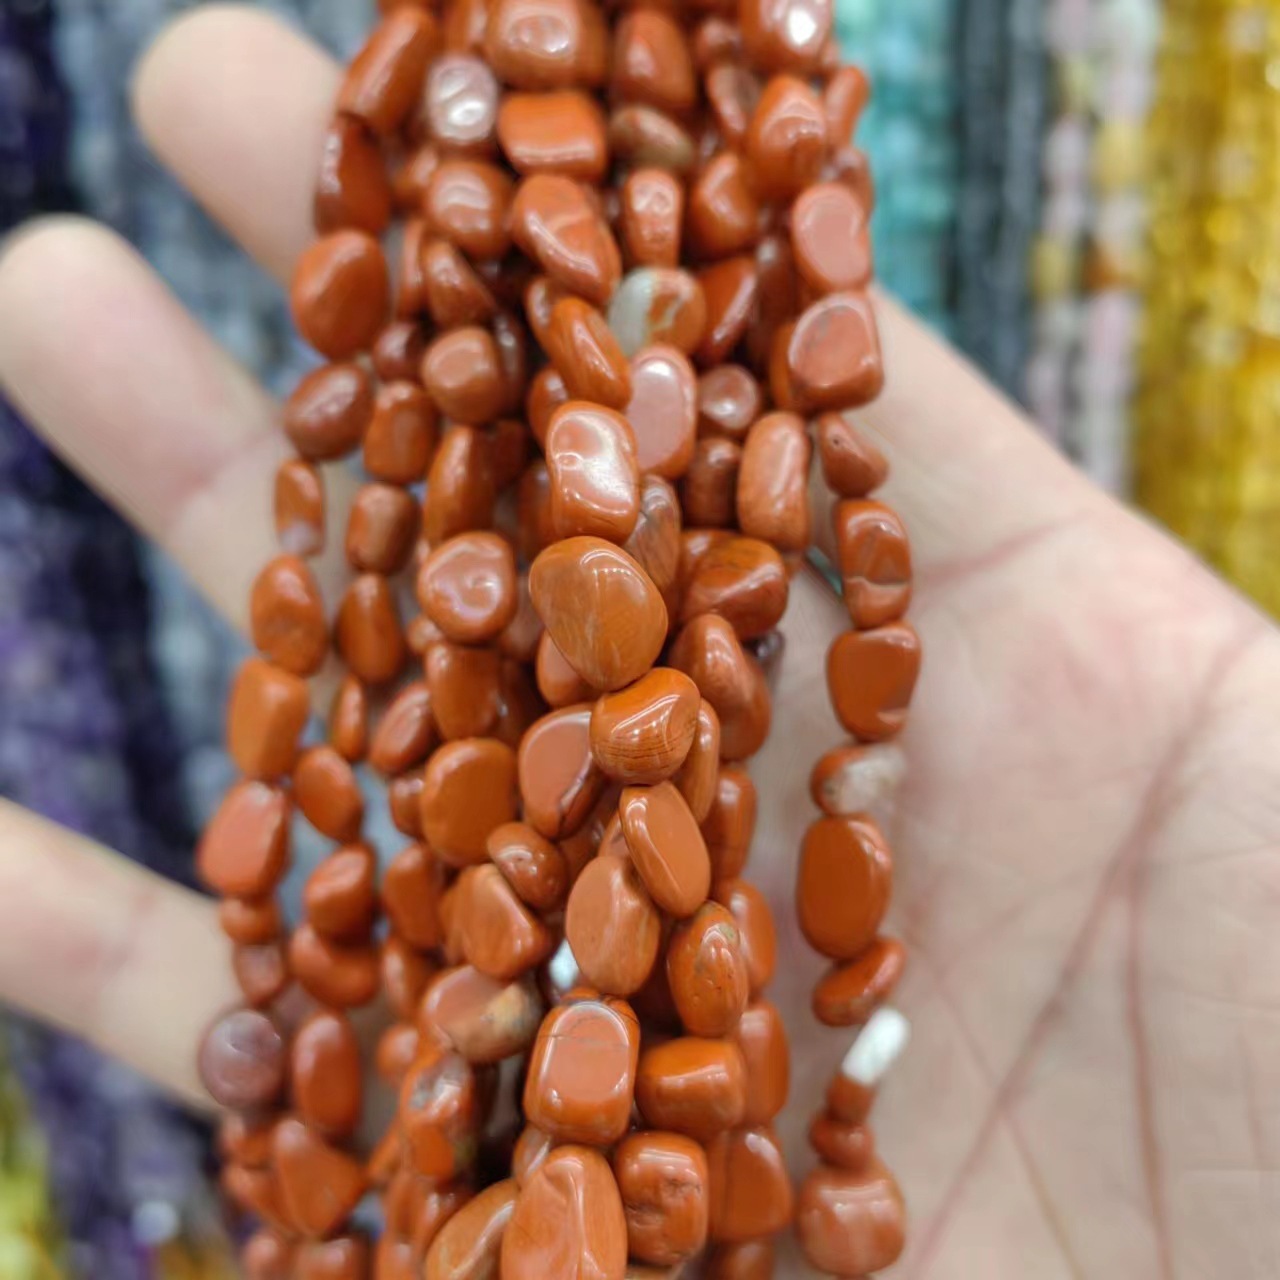 The natural red stone is about 6 × 8 mm